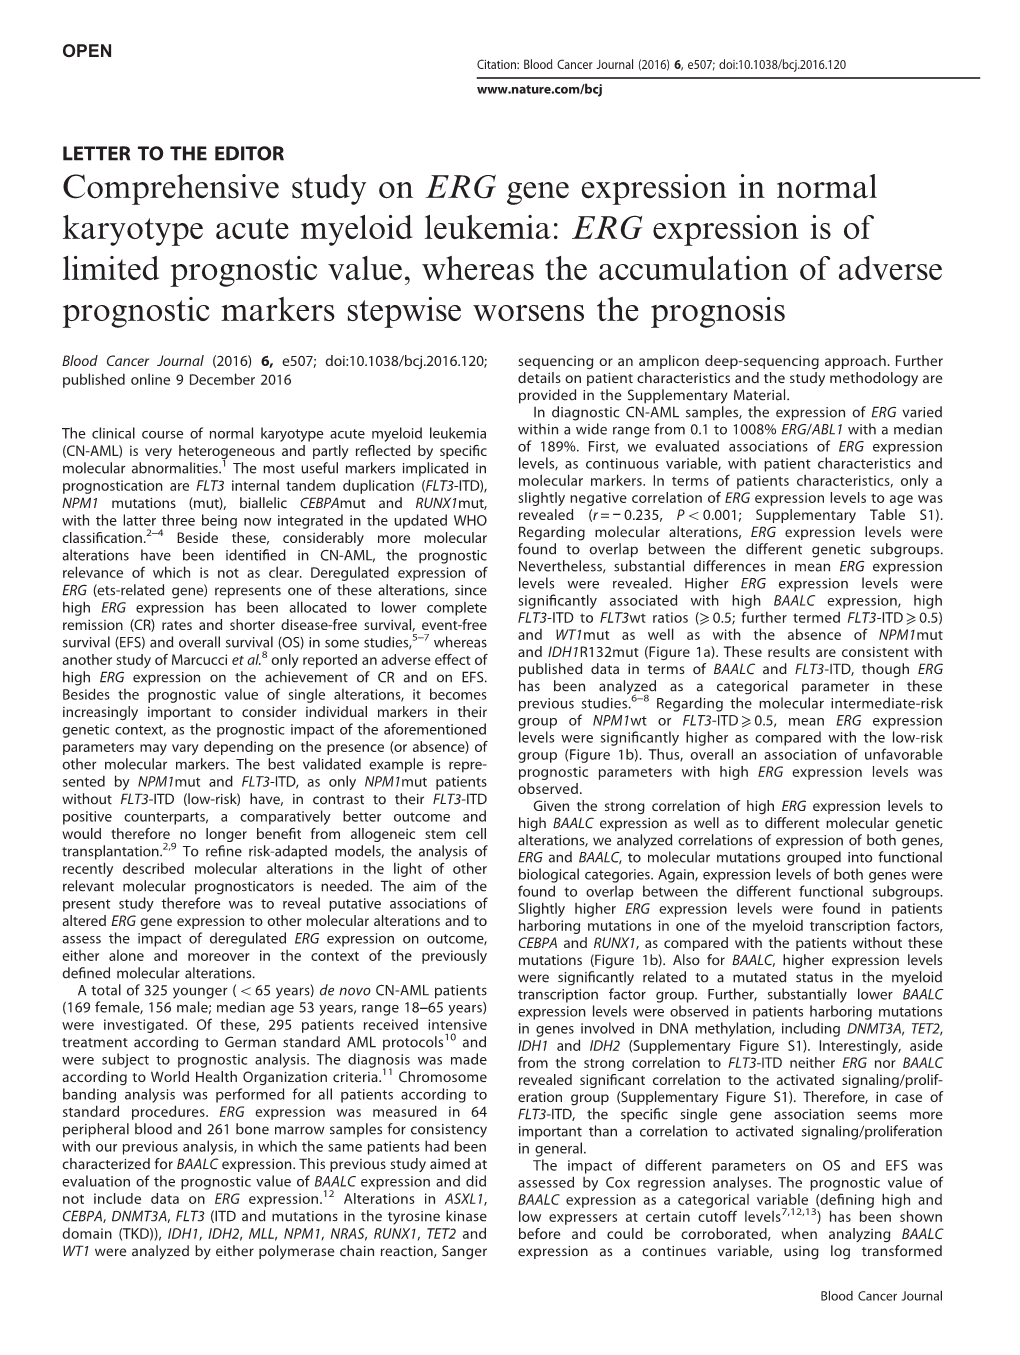 Comprehensive Study on ERG Gene Expression In